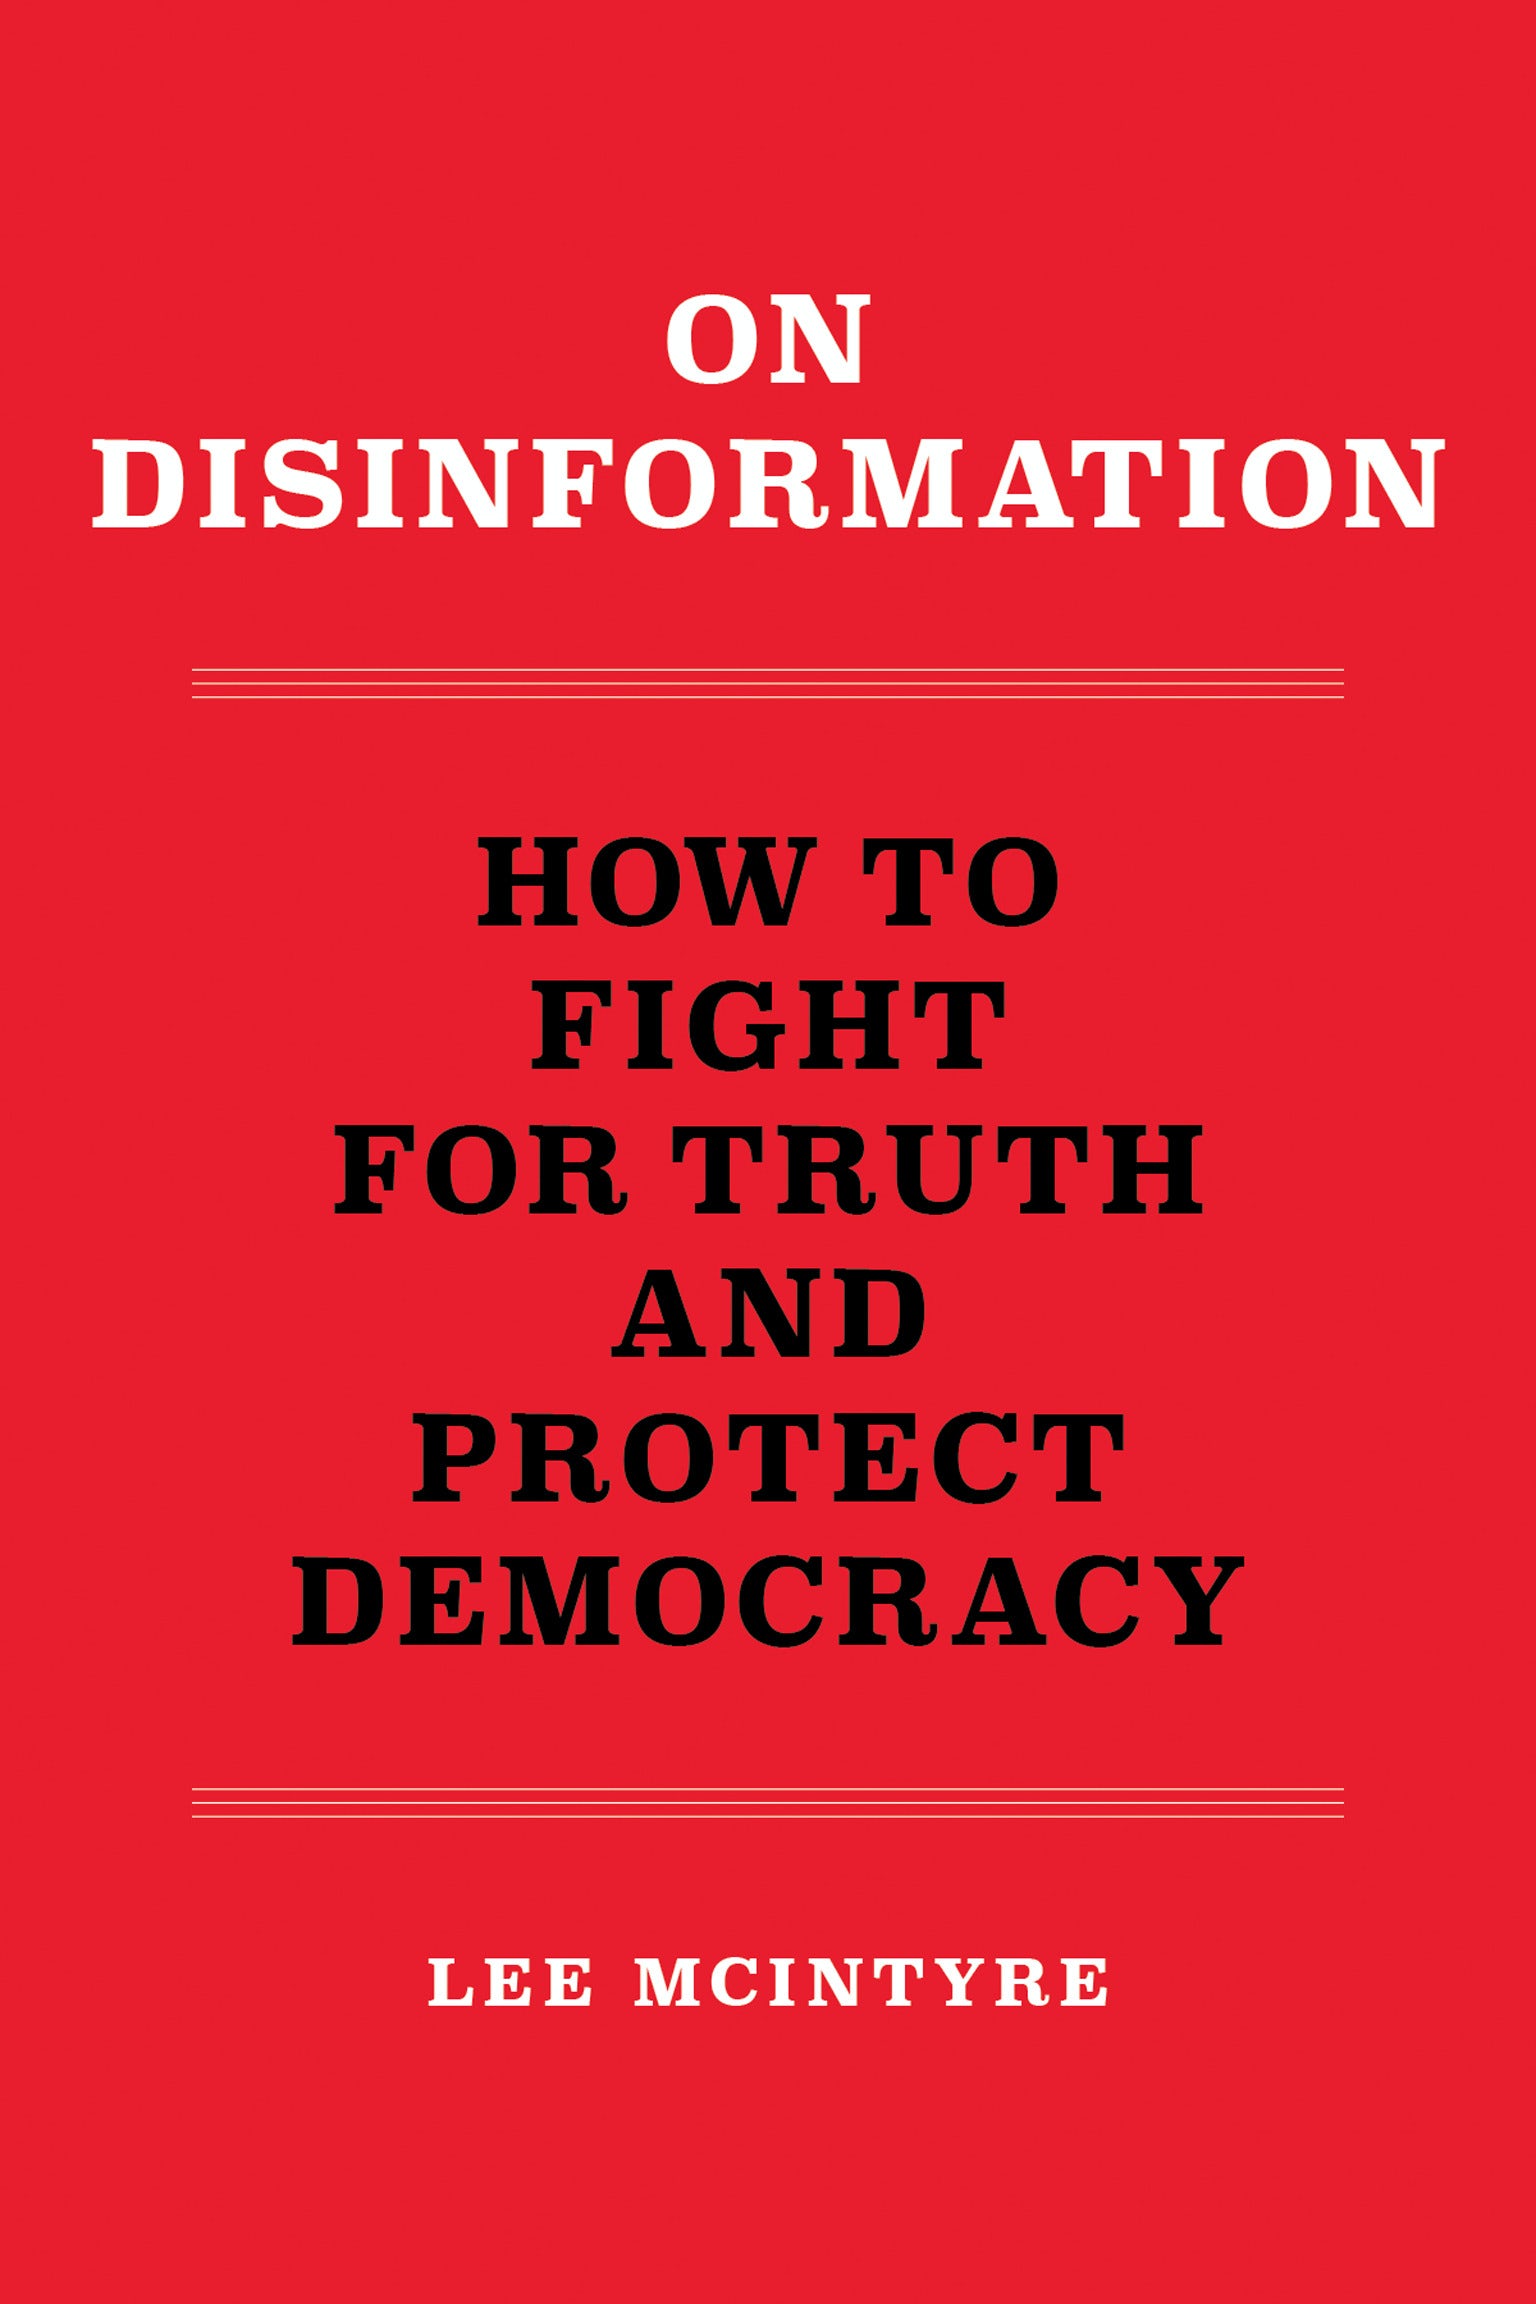 book cover, red with title On DIscrimination and subtitle  How to Fight for Truth and protect Democracy